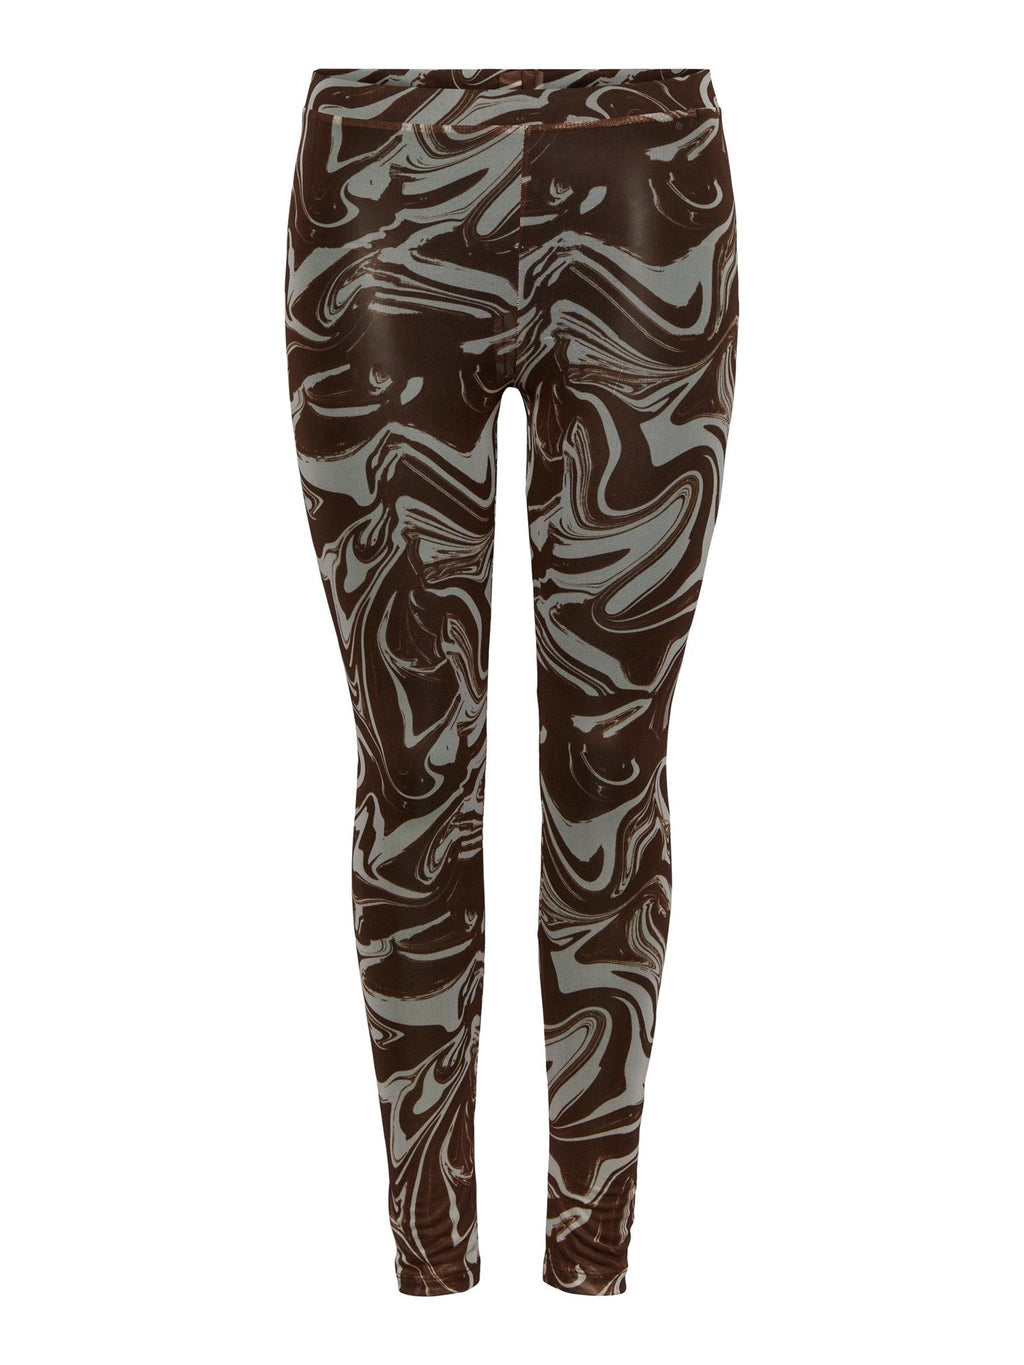 Simmo hohe Taille -Leggings - Mustang